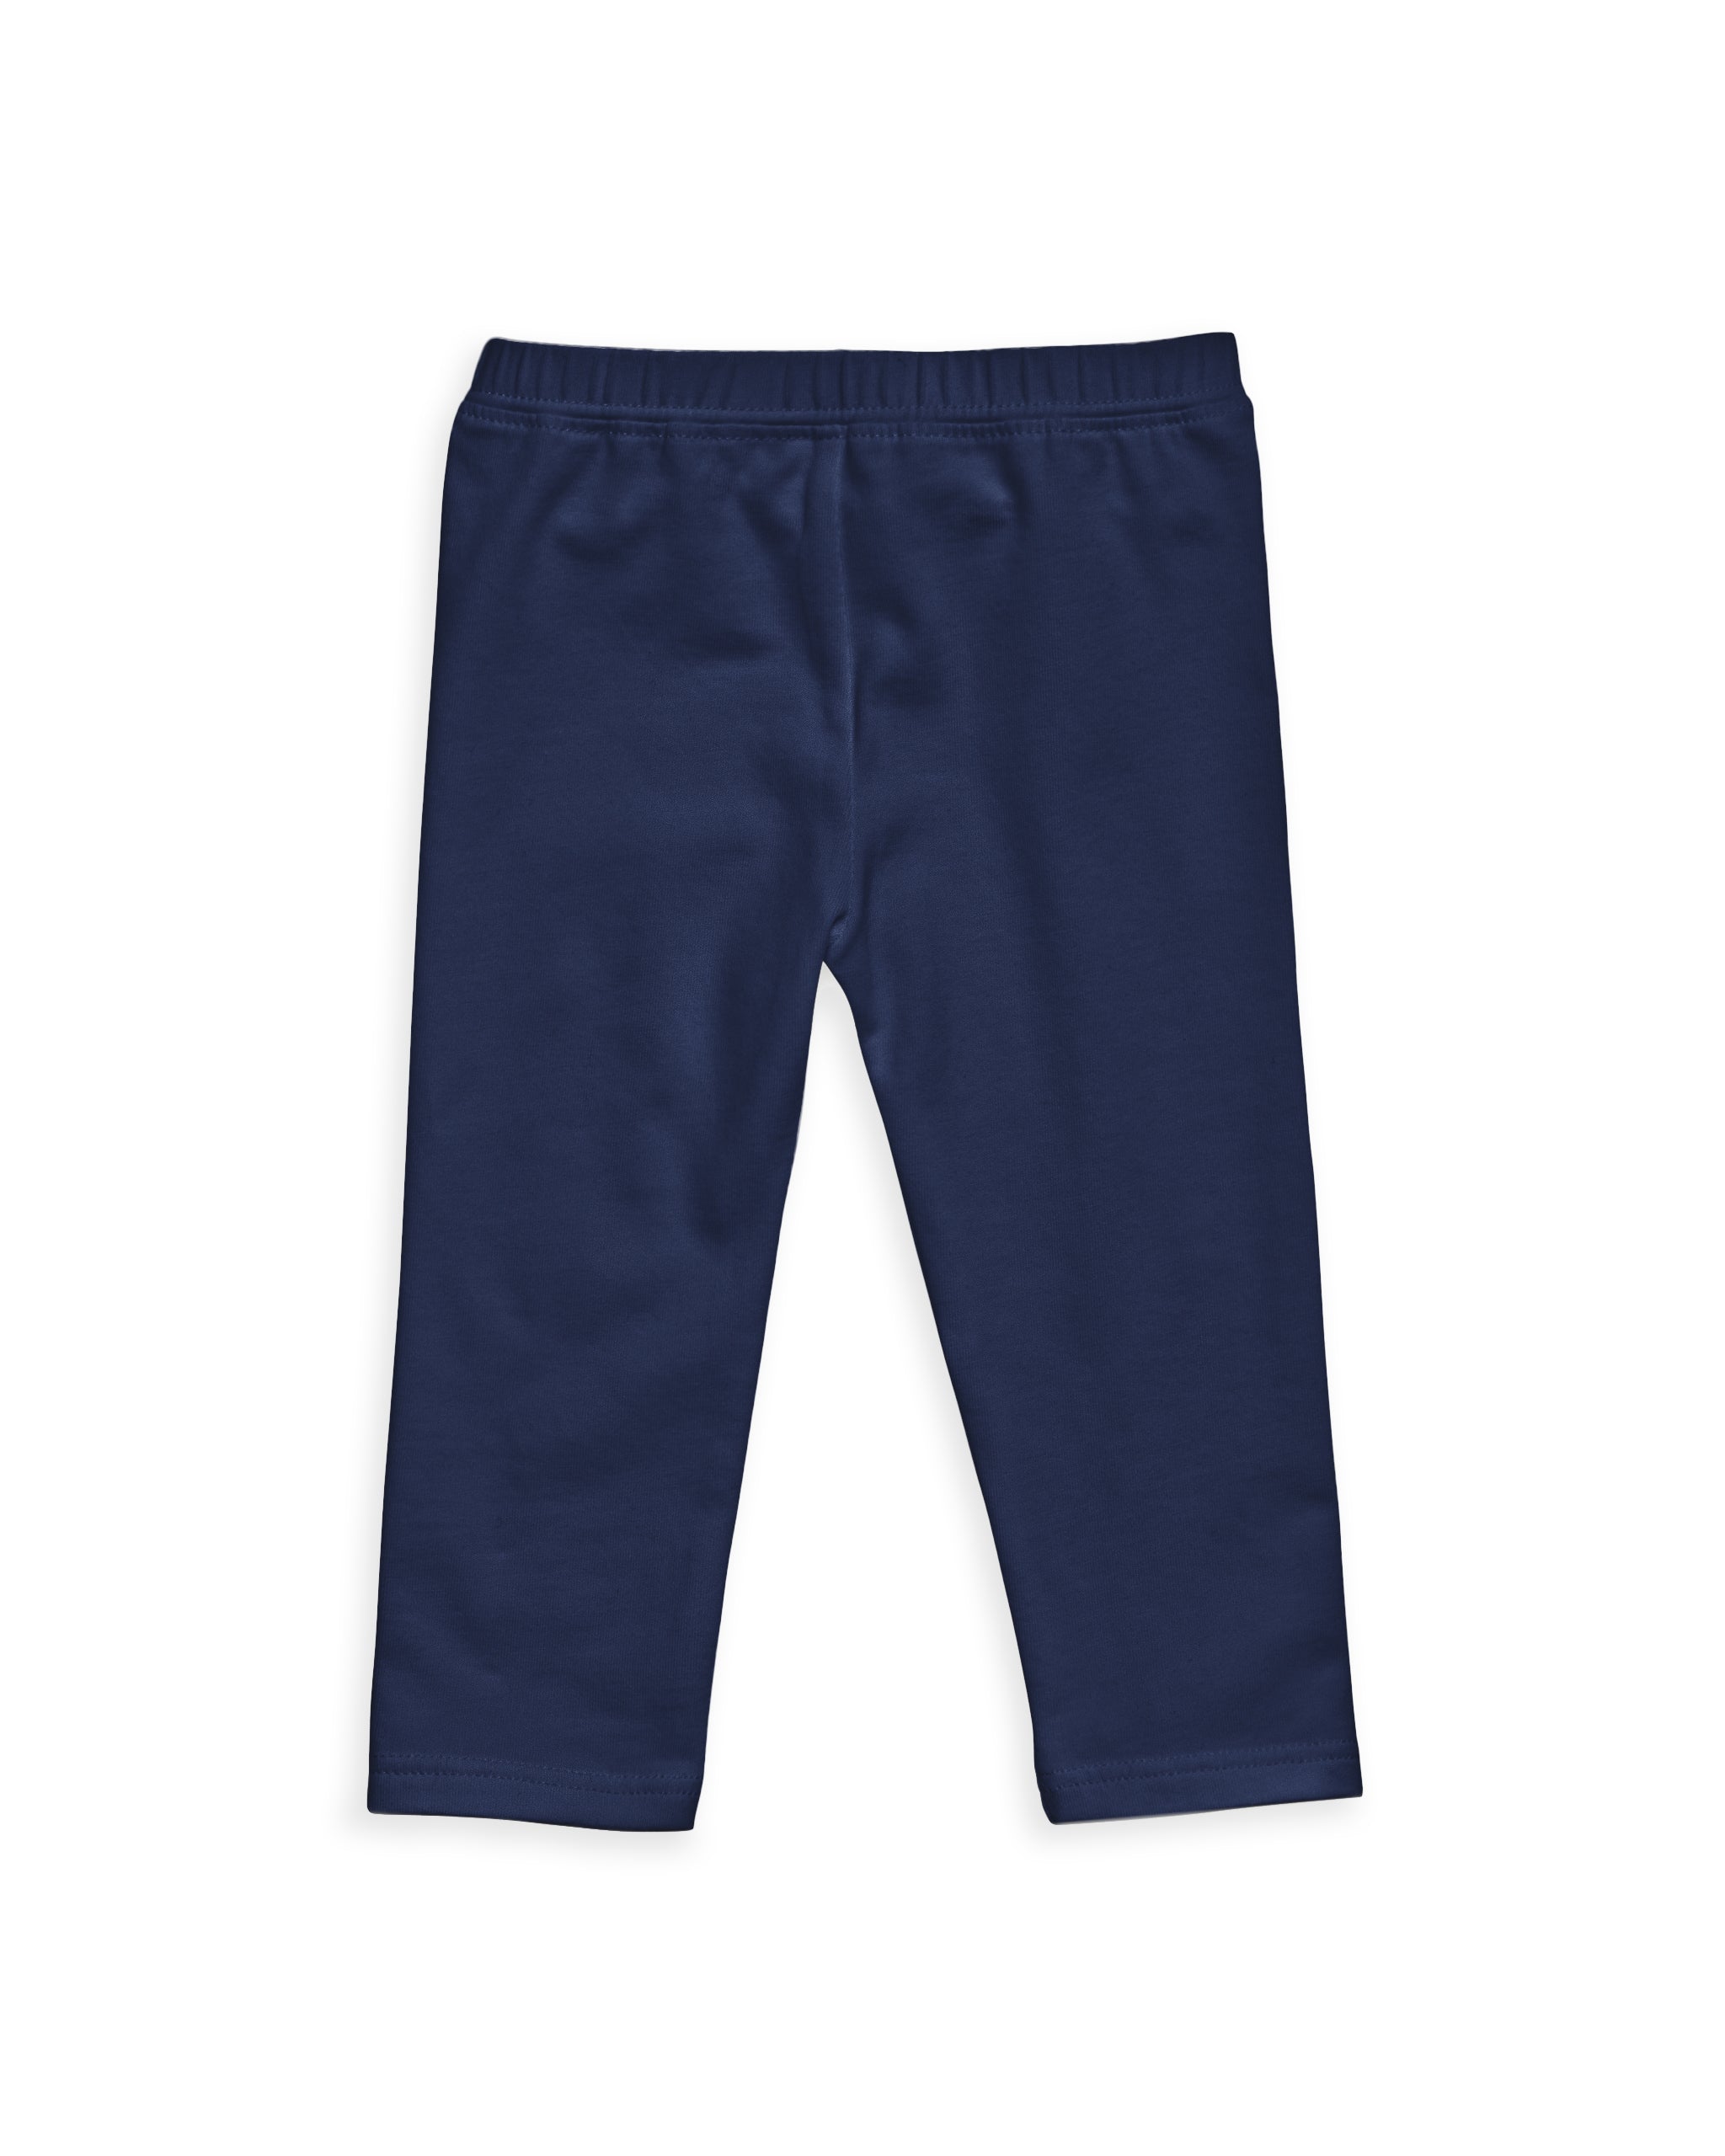 Navy Organic Tights - Vancouver's Best Baby & Kids Store: Unique